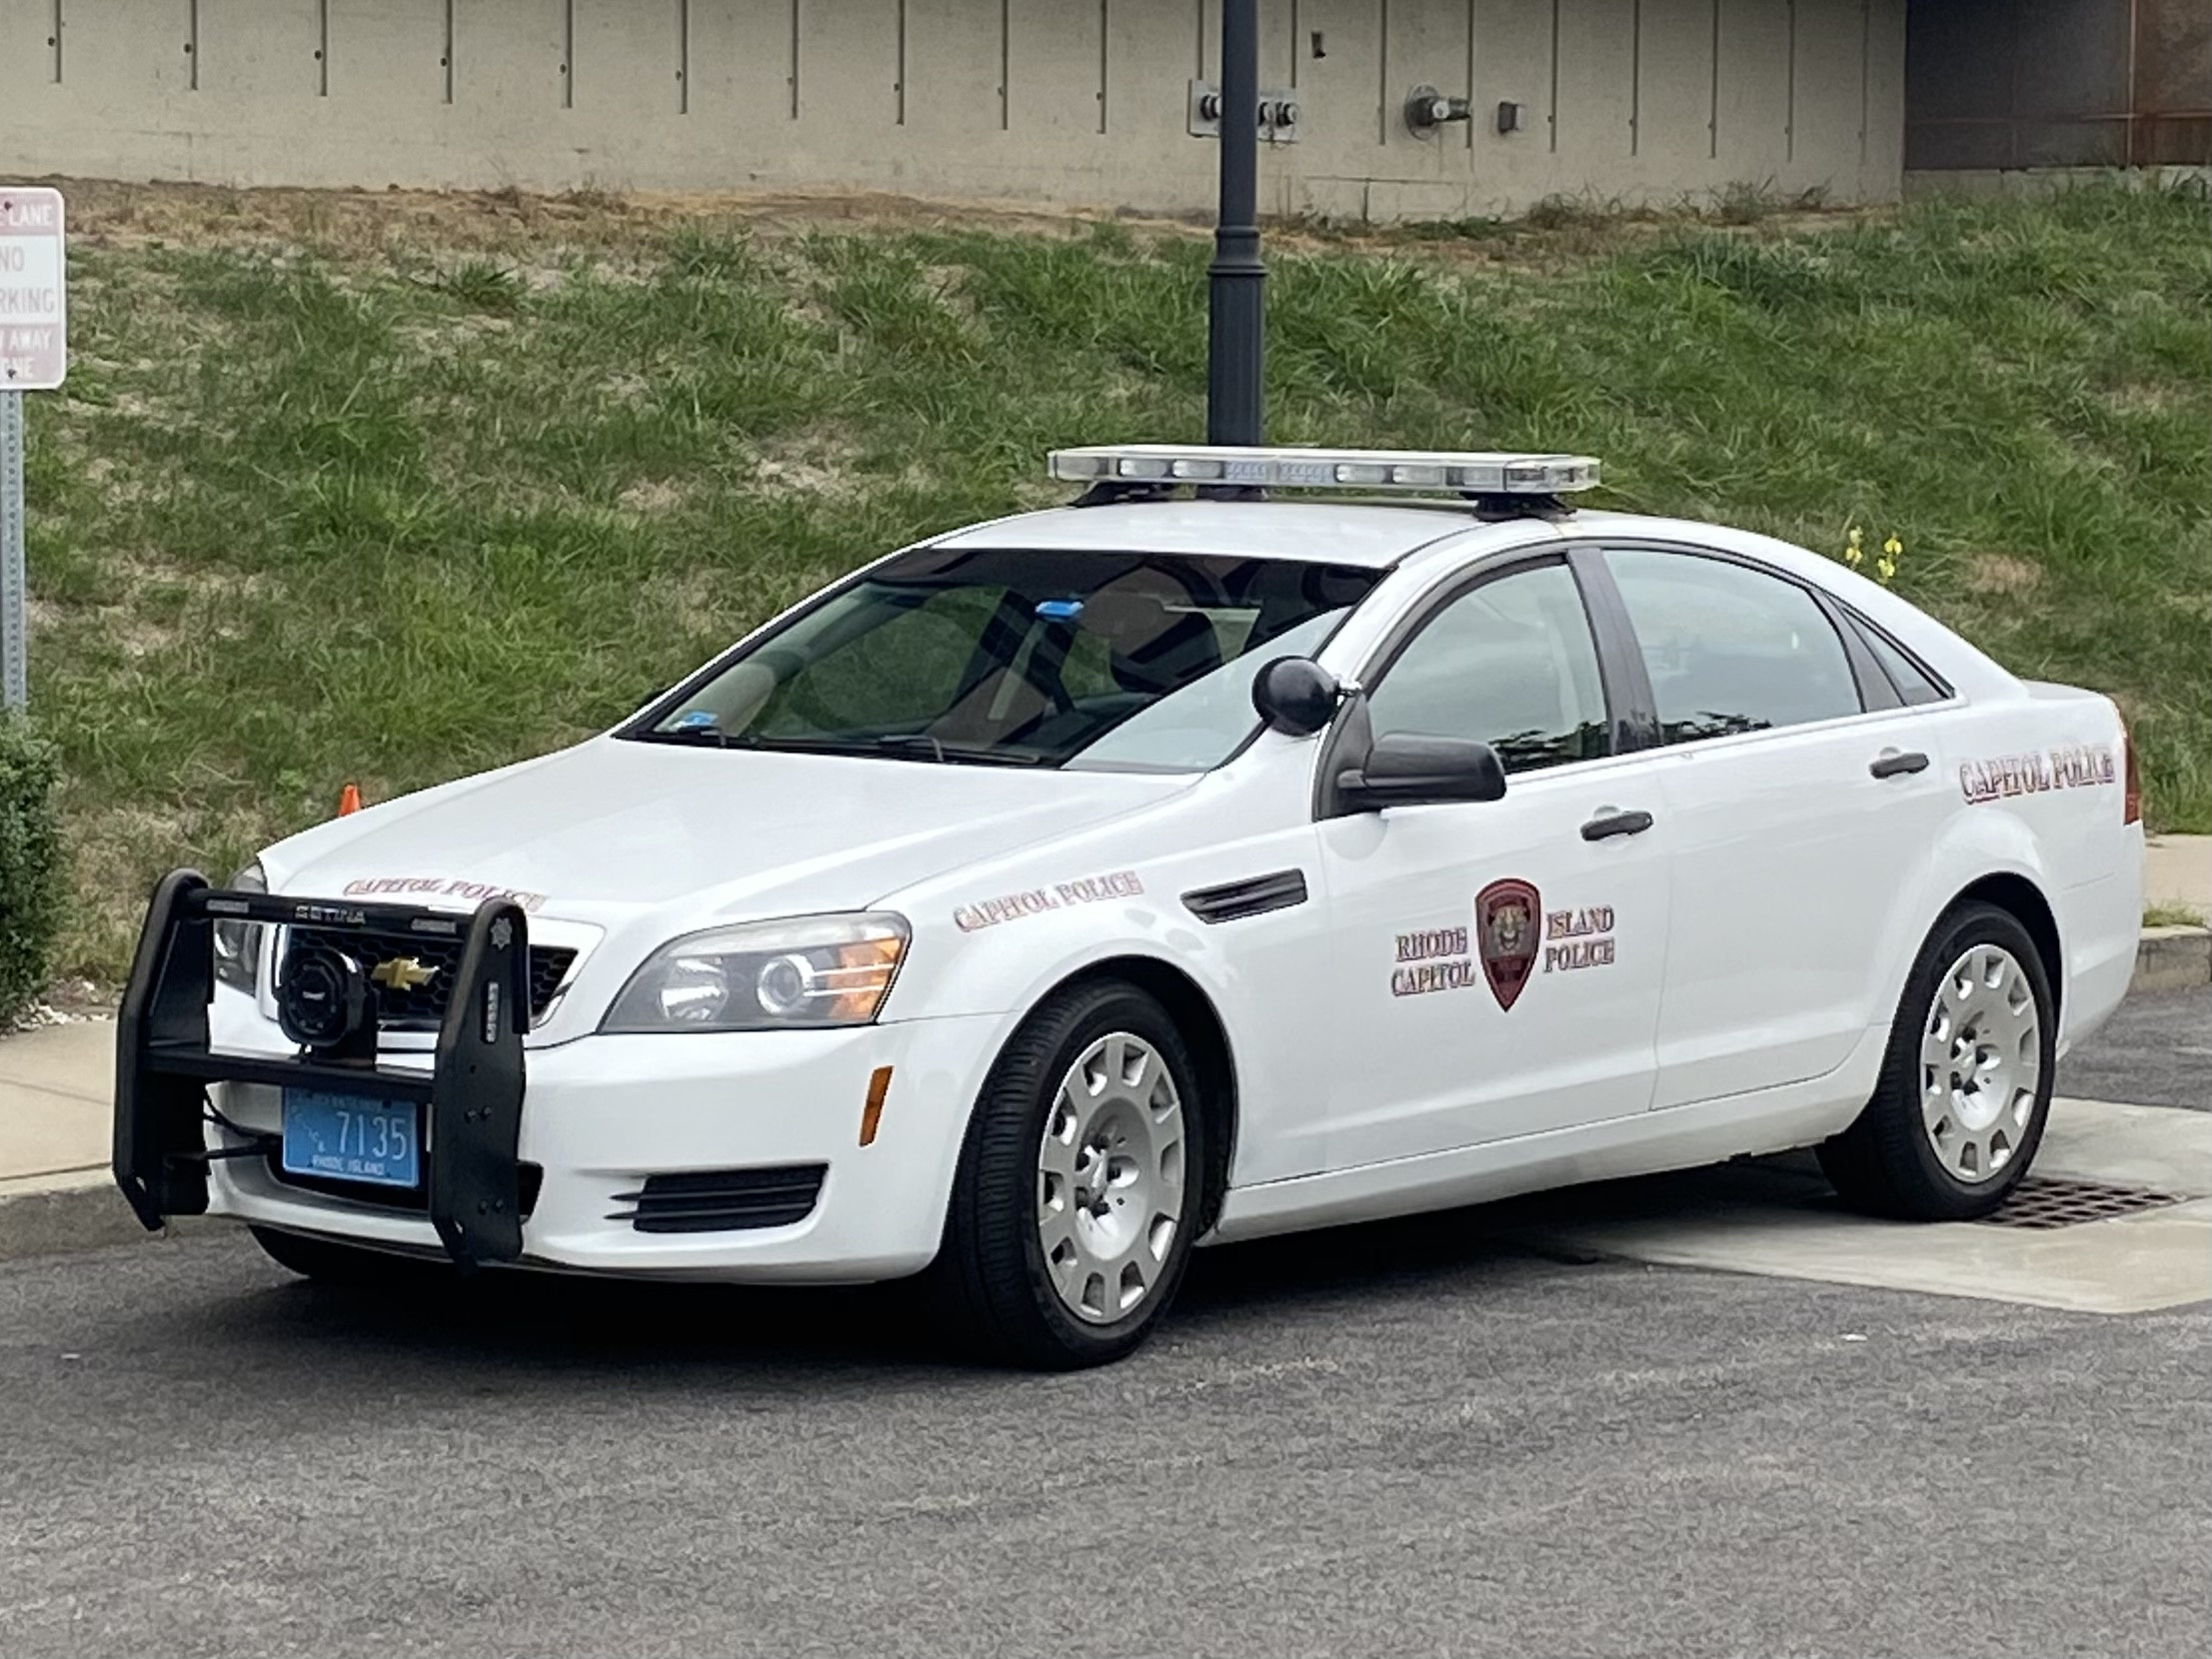 A photo  of Rhode Island Capitol Police
            Cruiser 7135, a 2014 Chevrolet Caprice             taken by @riemergencyvehicles